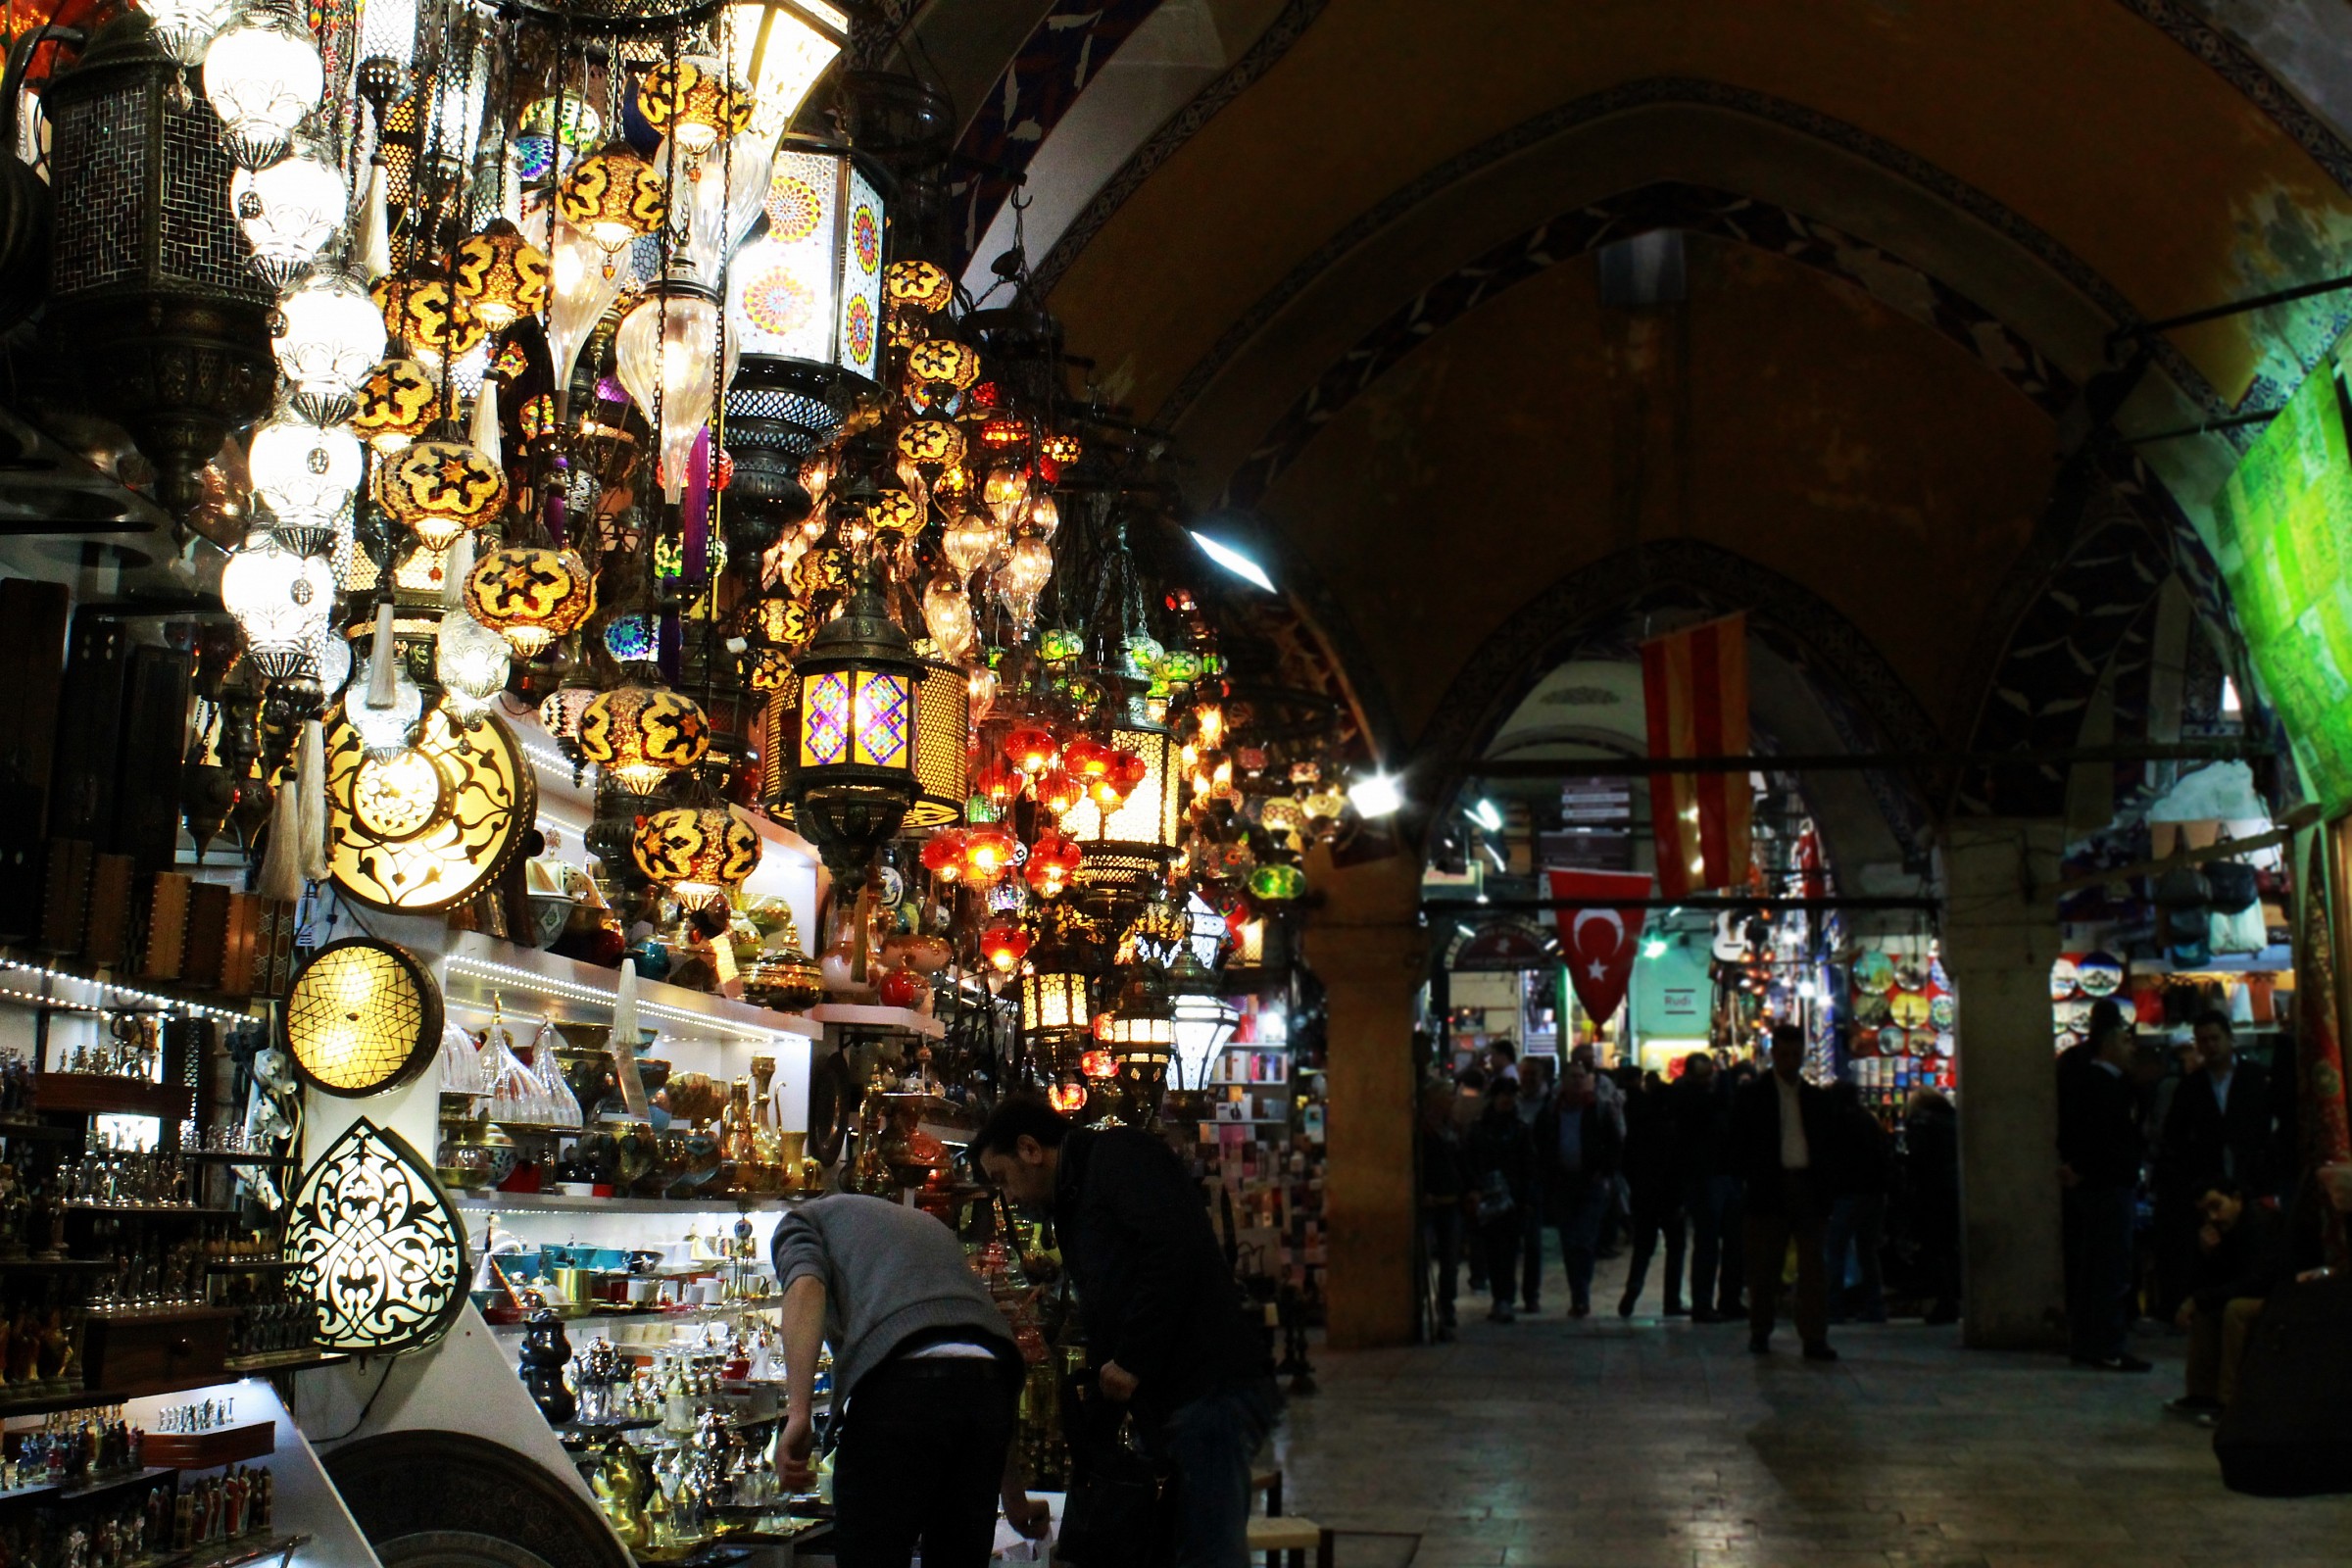 The streets of the Grand Bazaar...